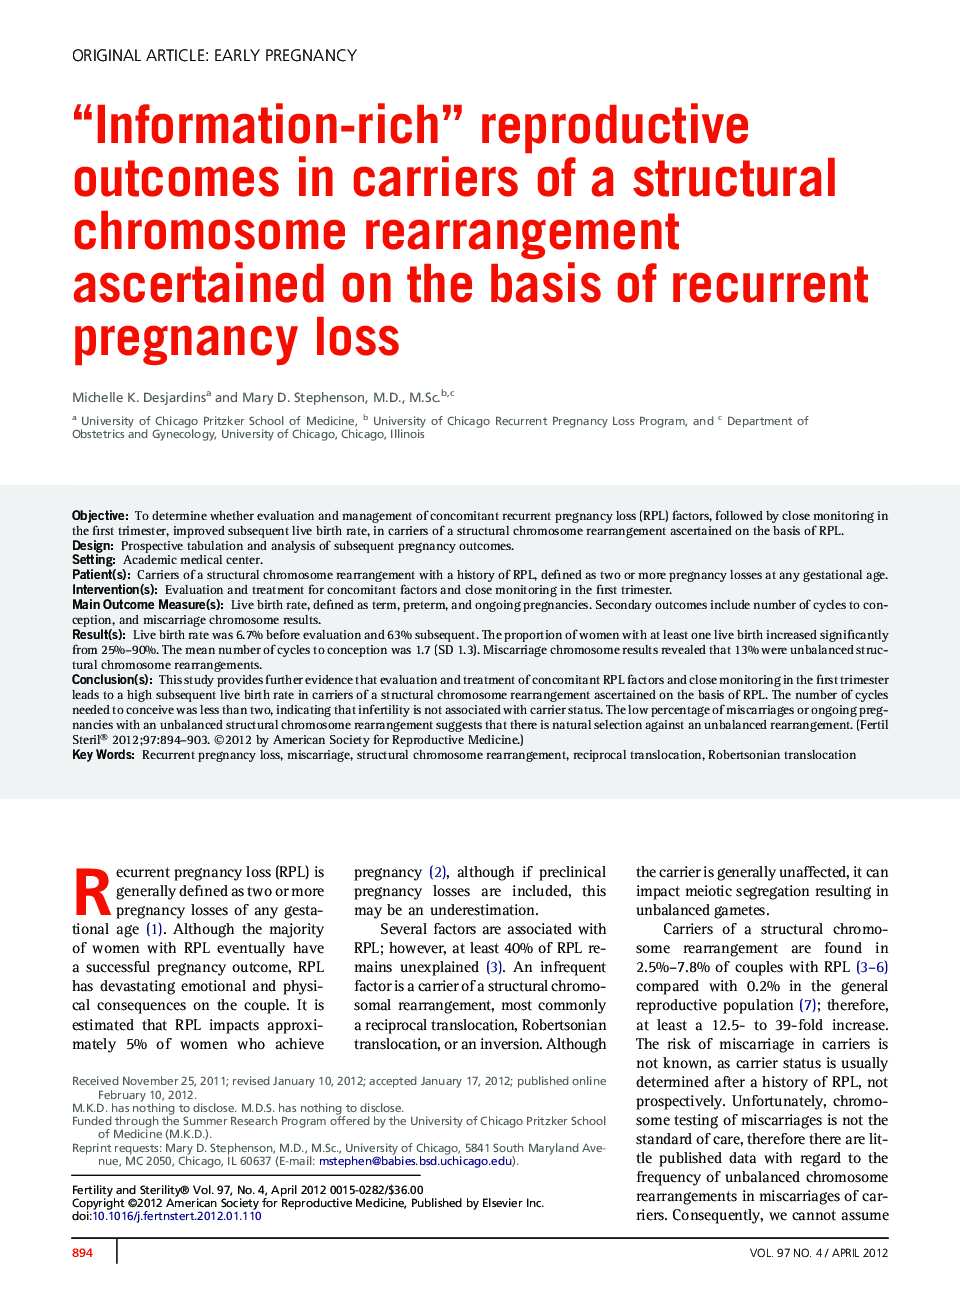 “Information-rich” reproductive outcomes in carriers of a structural chromosome rearrangement ascertained on the basis of recurrent pregnancy loss 